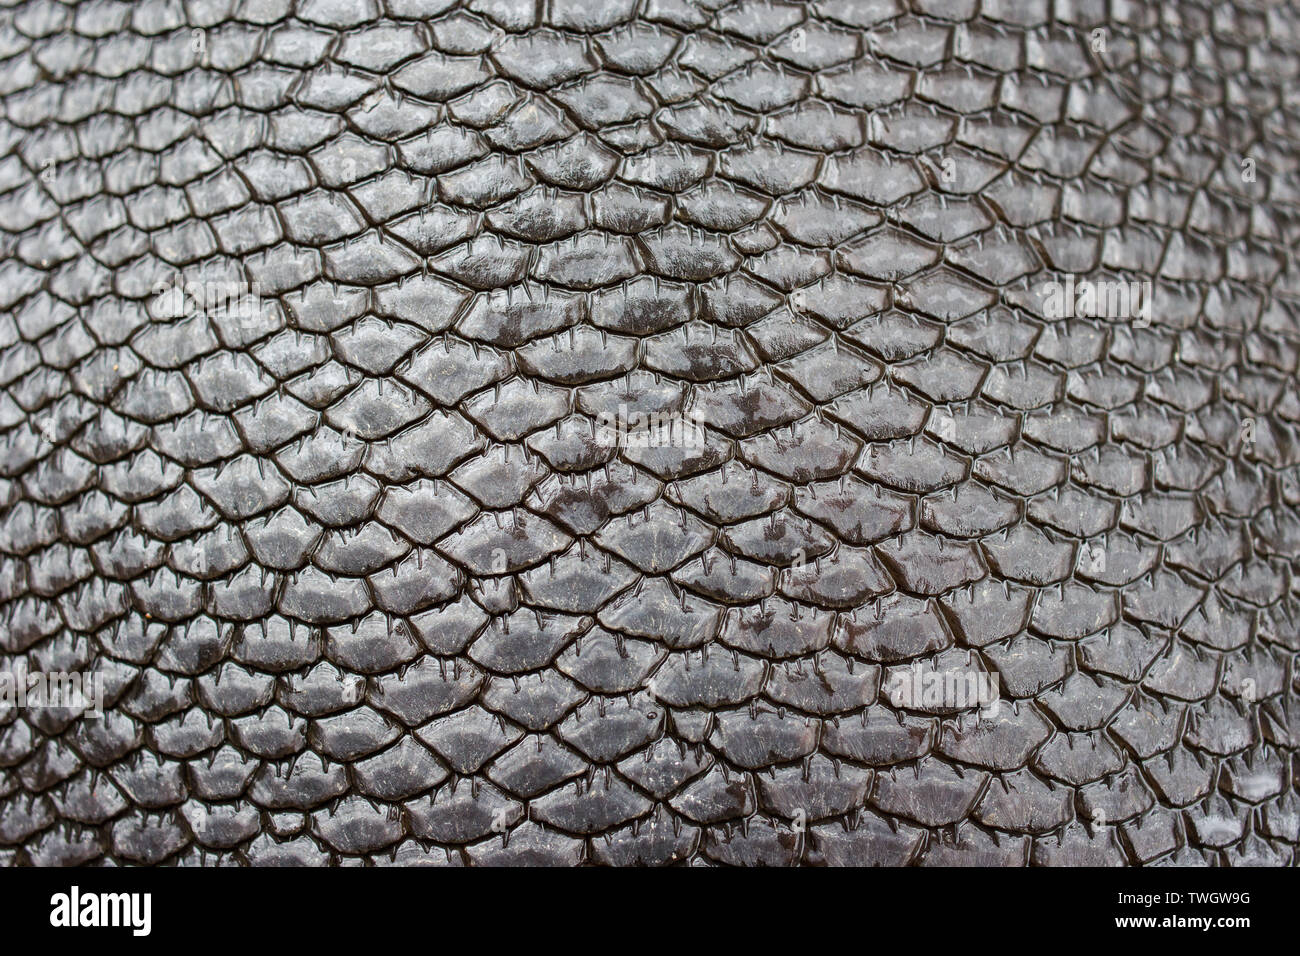 A closeup of a beaver (Castor canadensis) tail showing details of the scales. Stock Photo